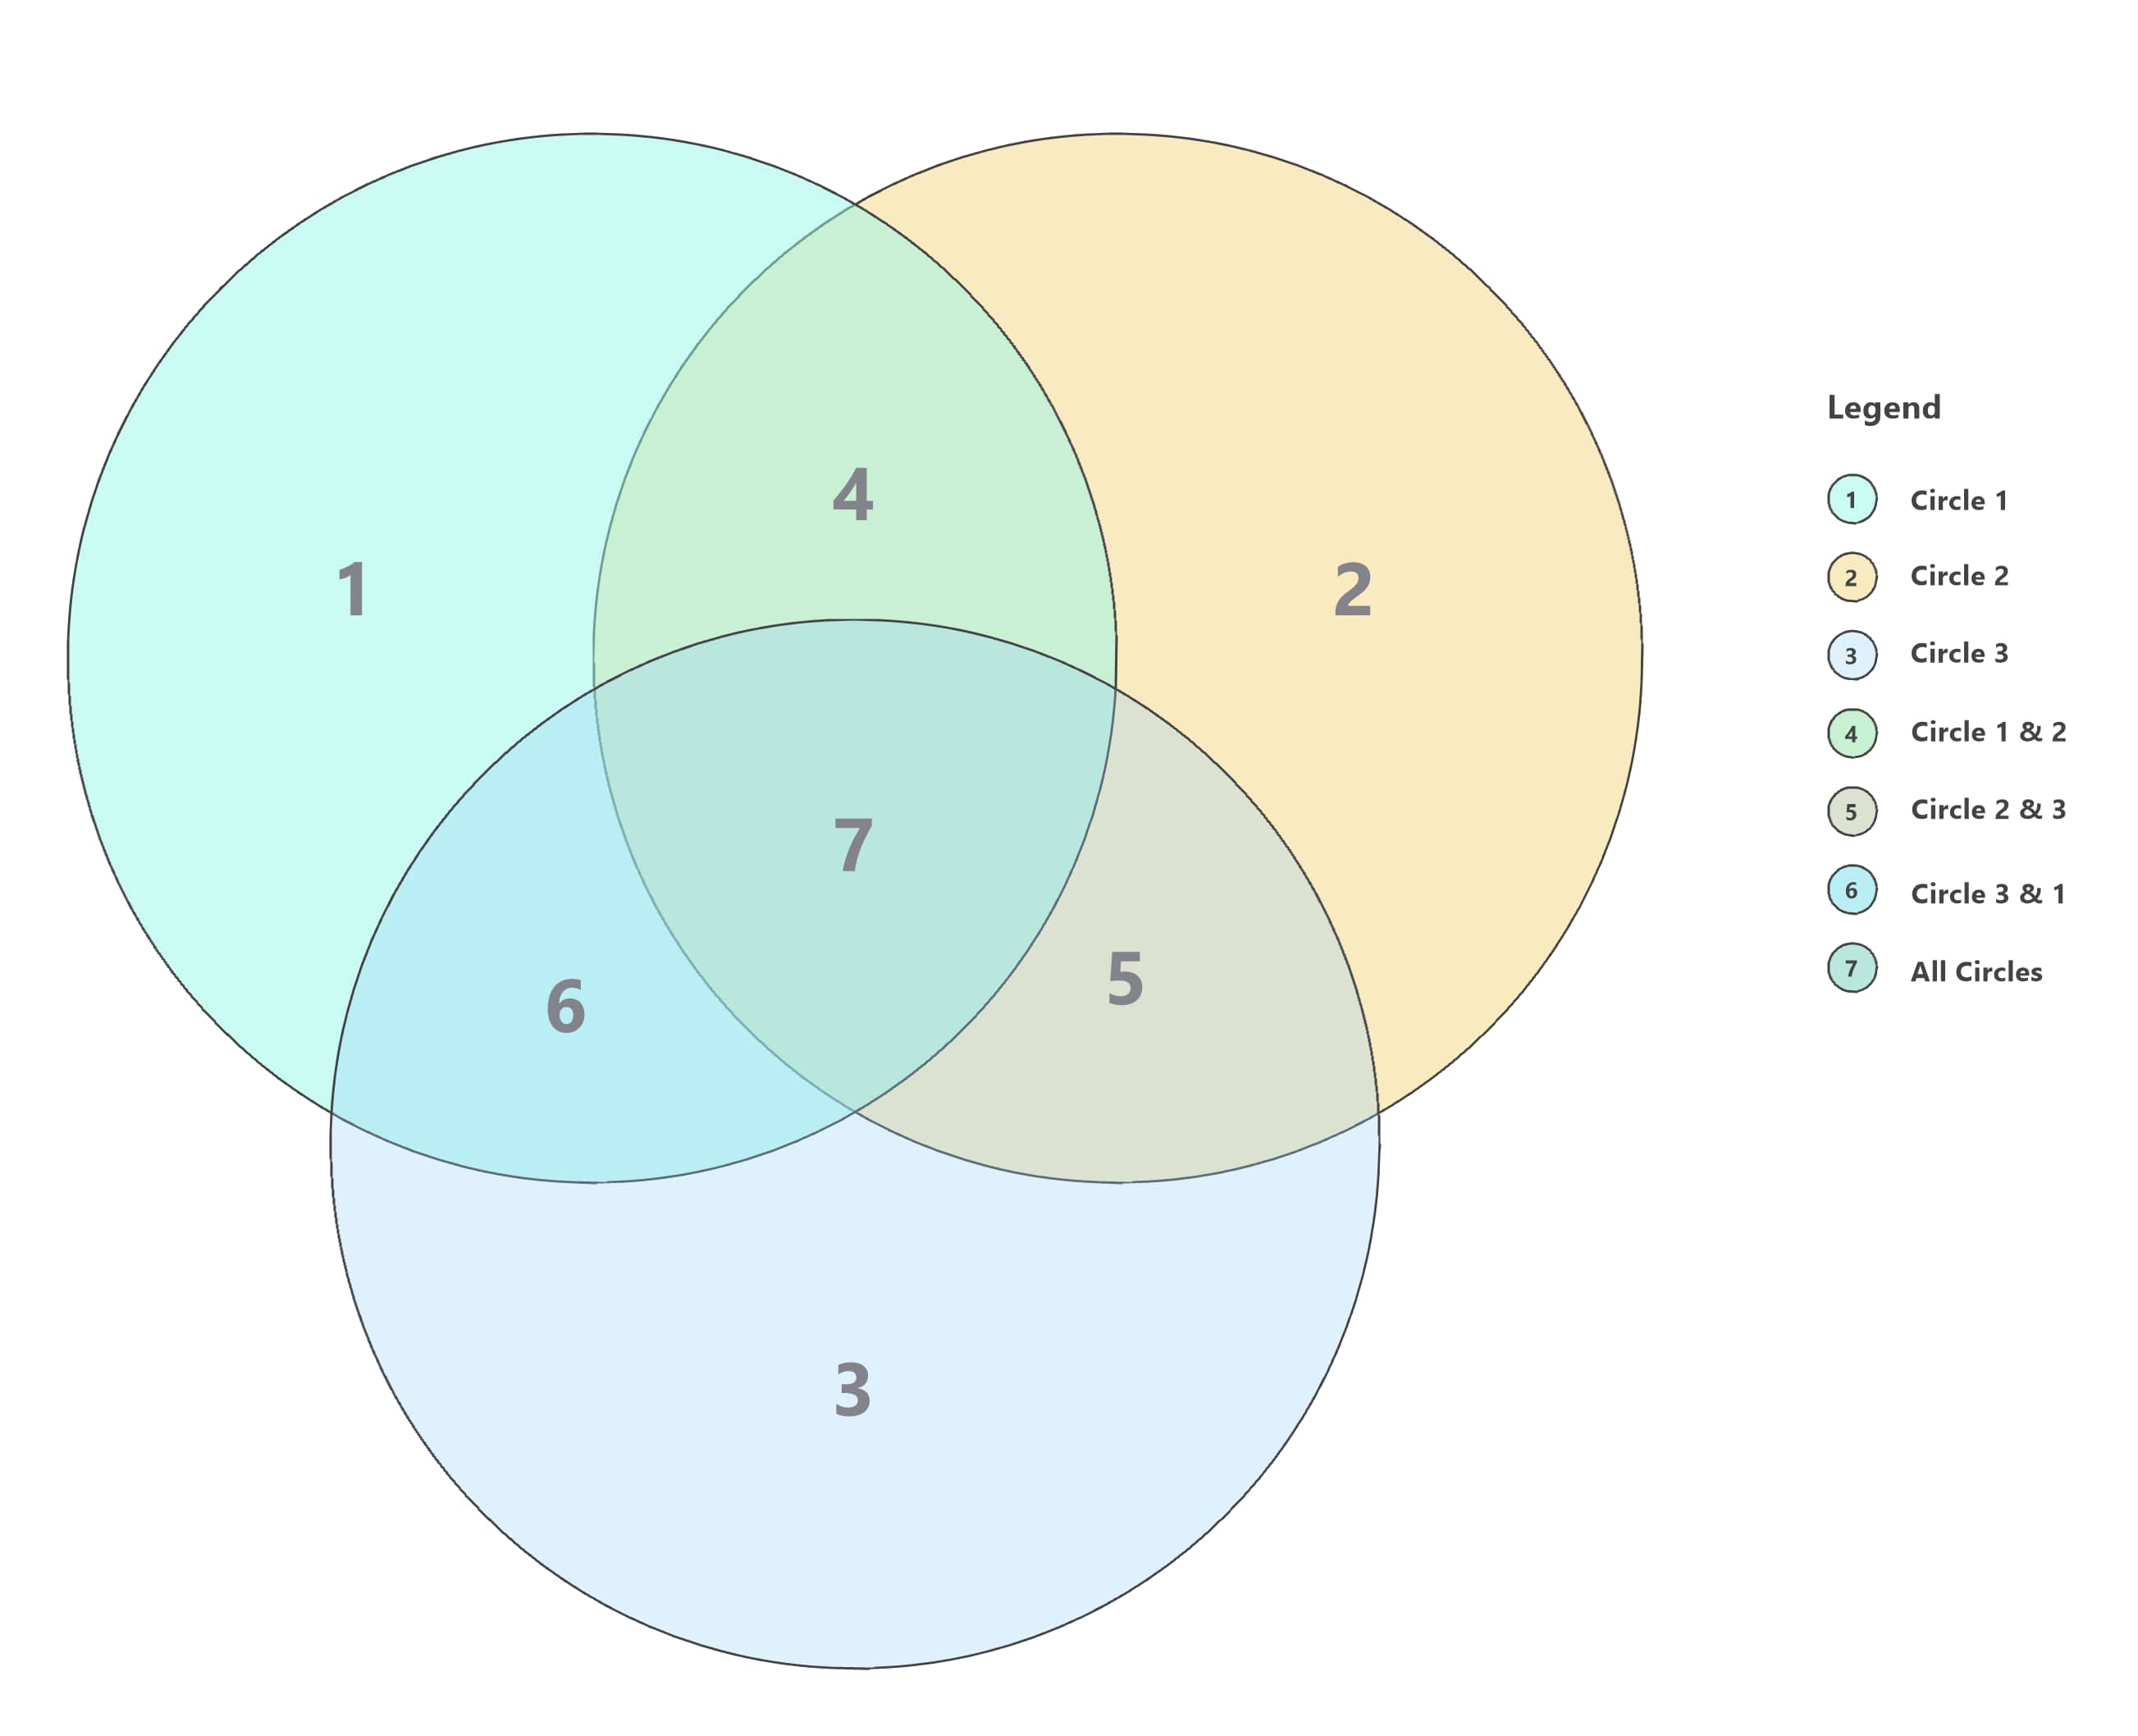 r - Get the list of items in Venn diagram - Stack Overflow